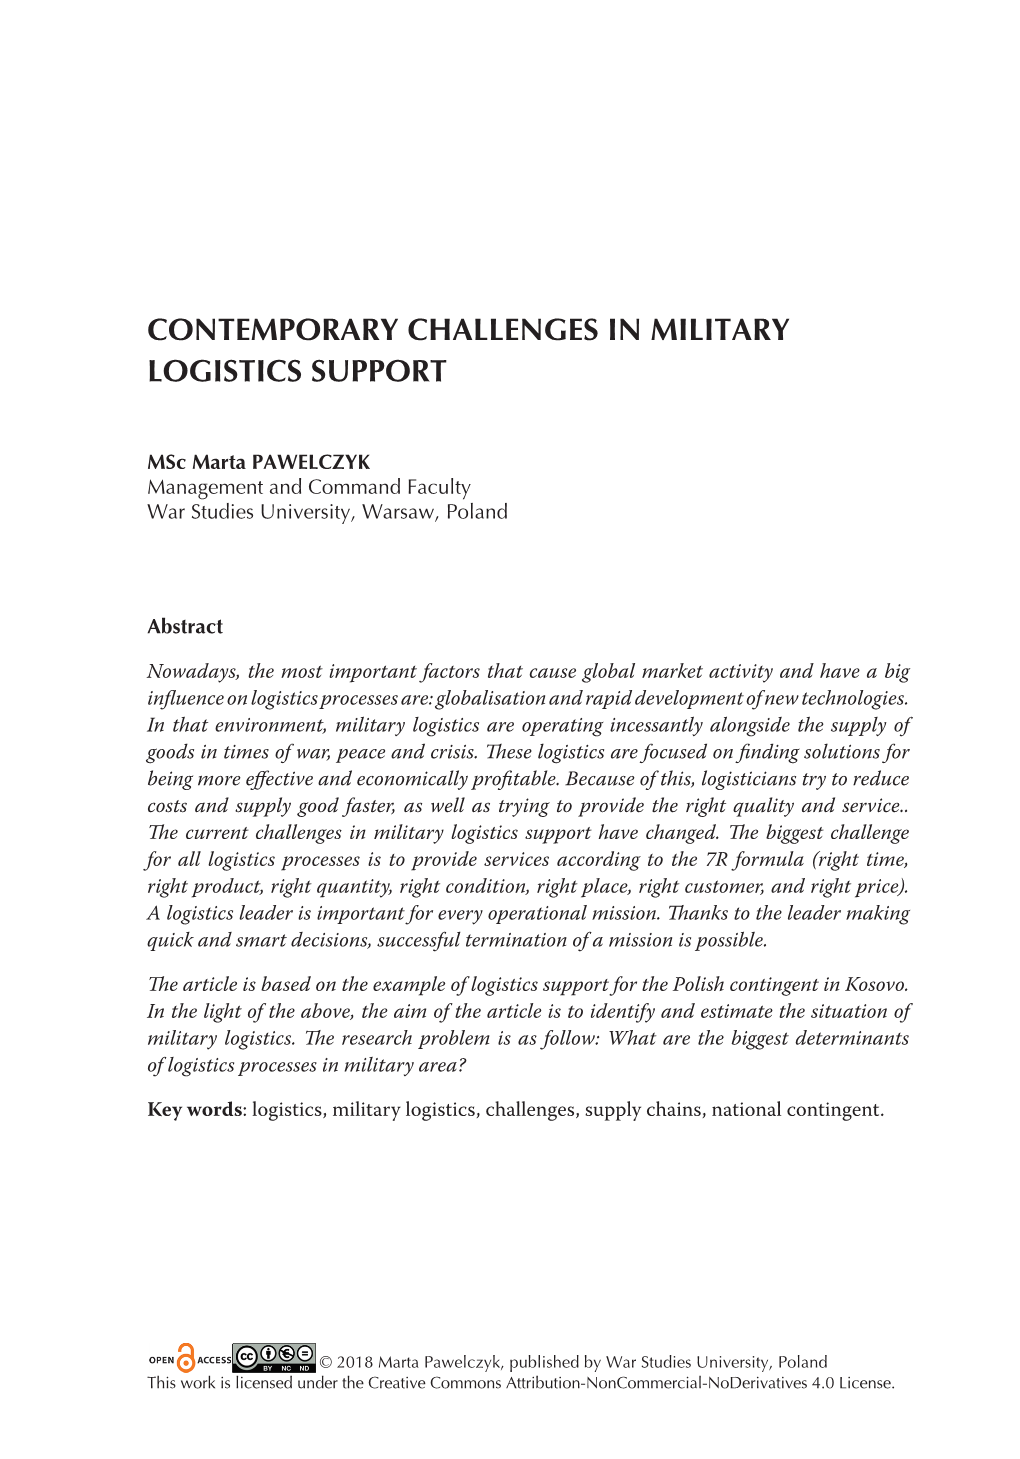 Contemporary Challenges in Military Logistics Support